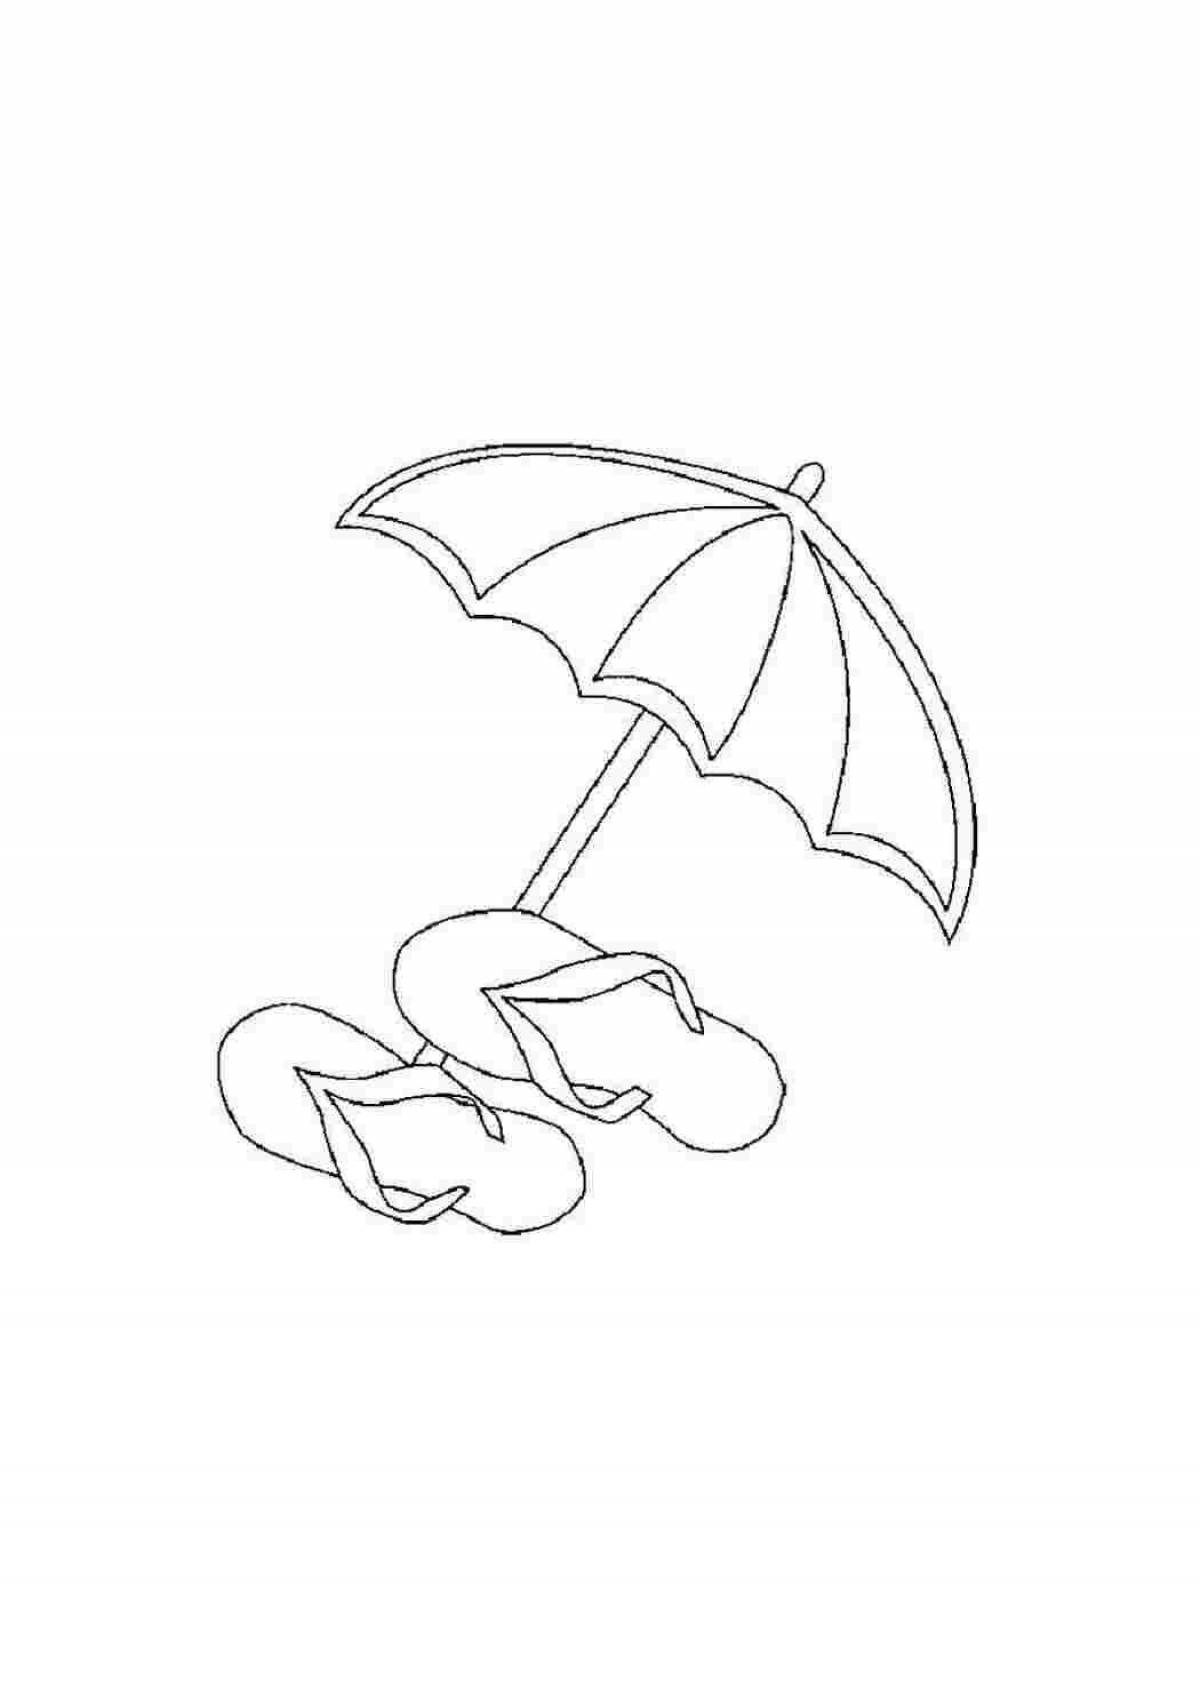 Colored umbrella for children 4-5 years old